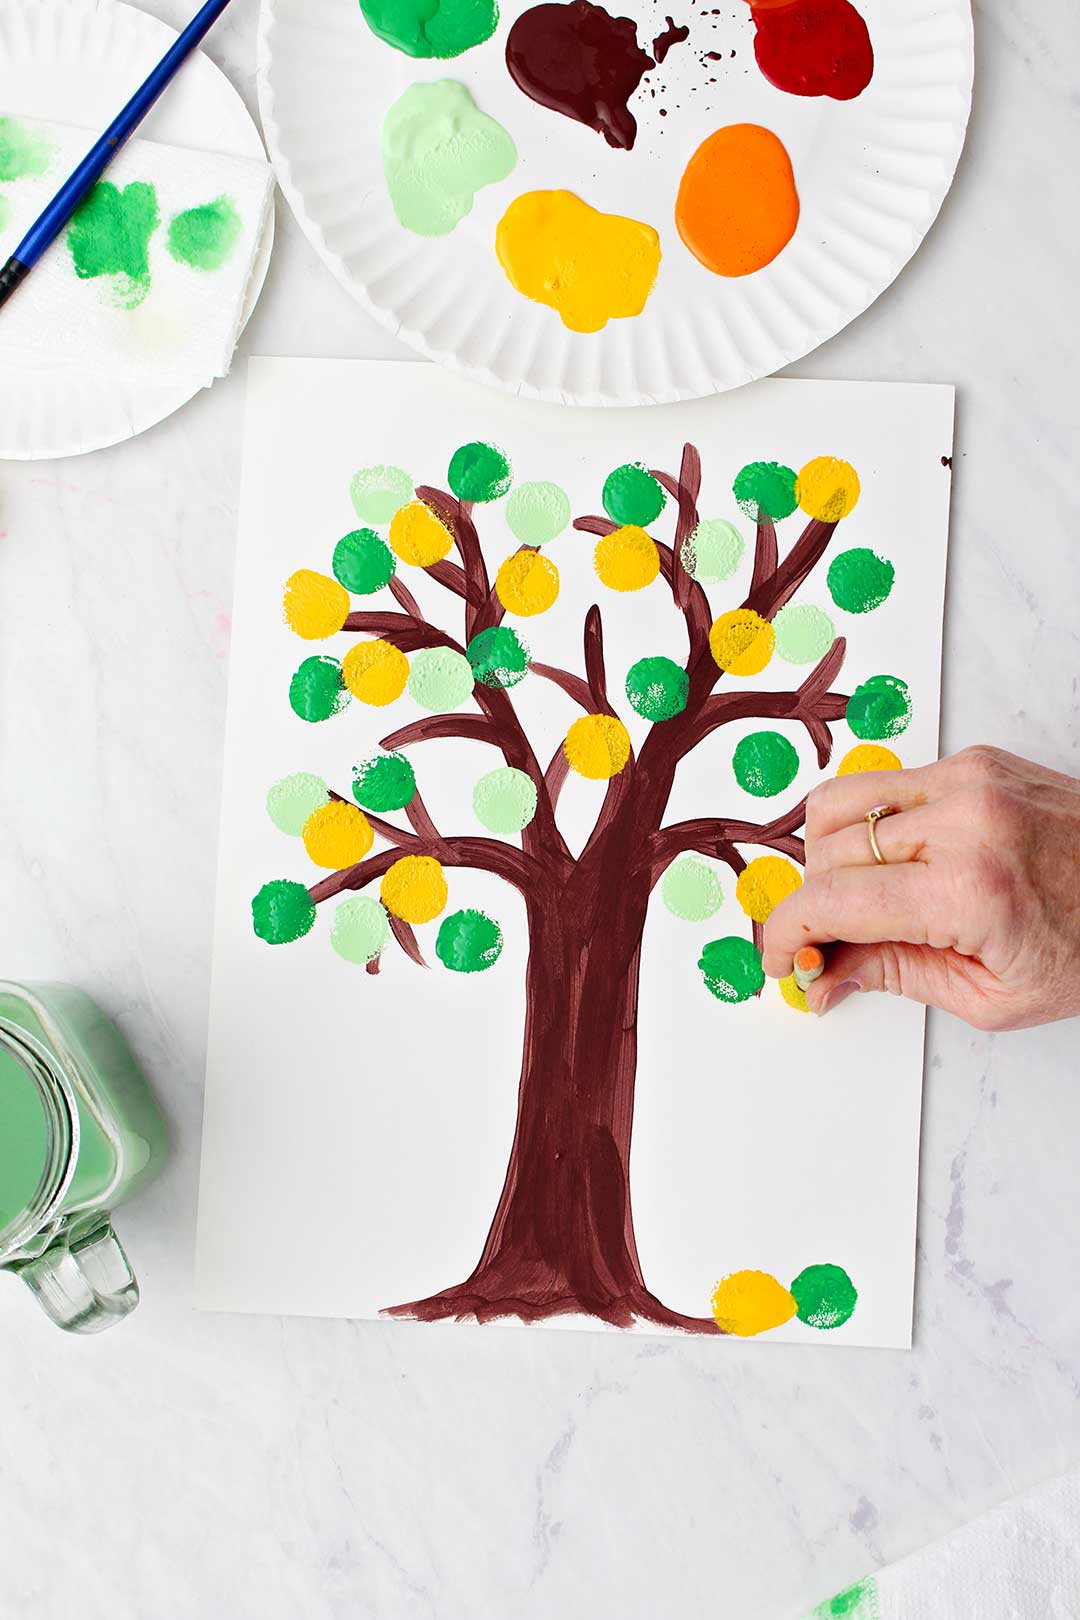 Hand stamping yellow leaves on tree painting using circular stamping tool.